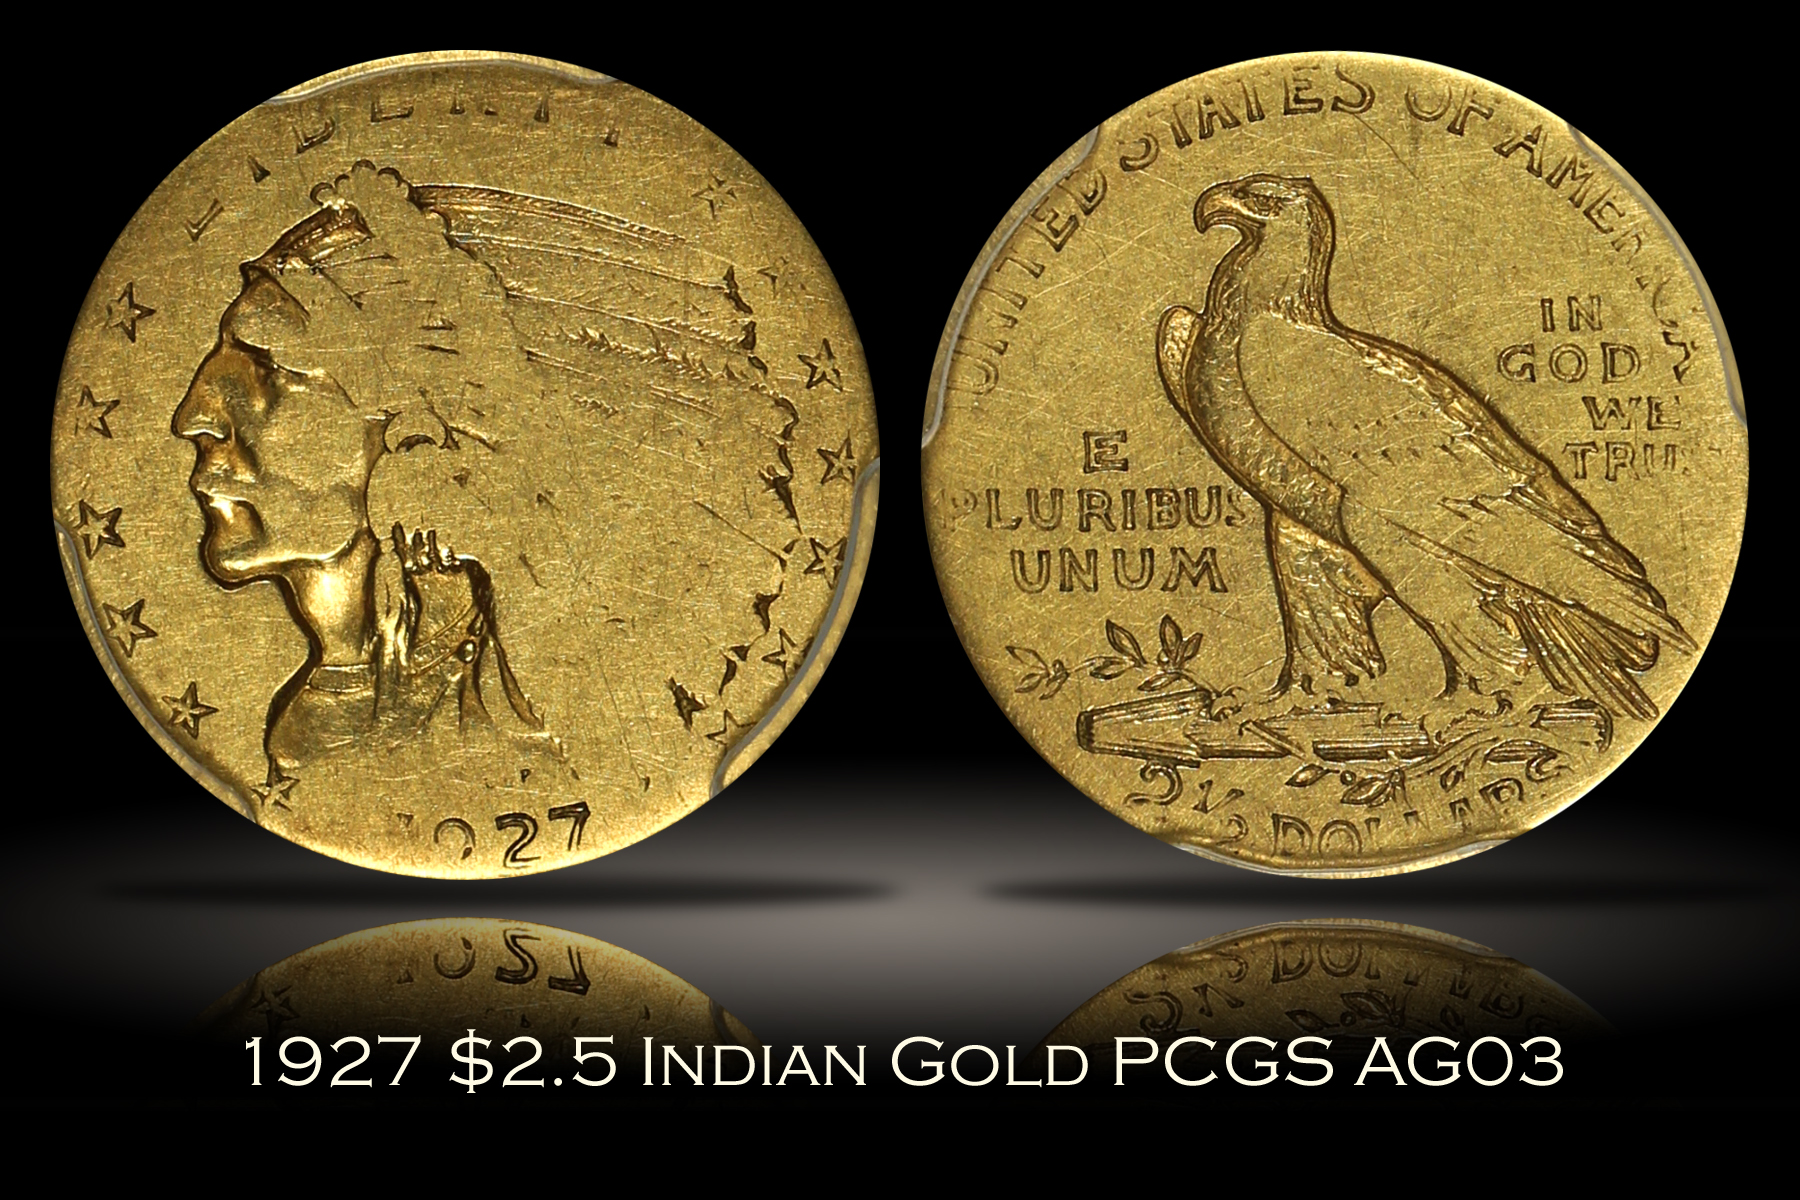 1927 $2.5 Indian Gold PCGS AG03